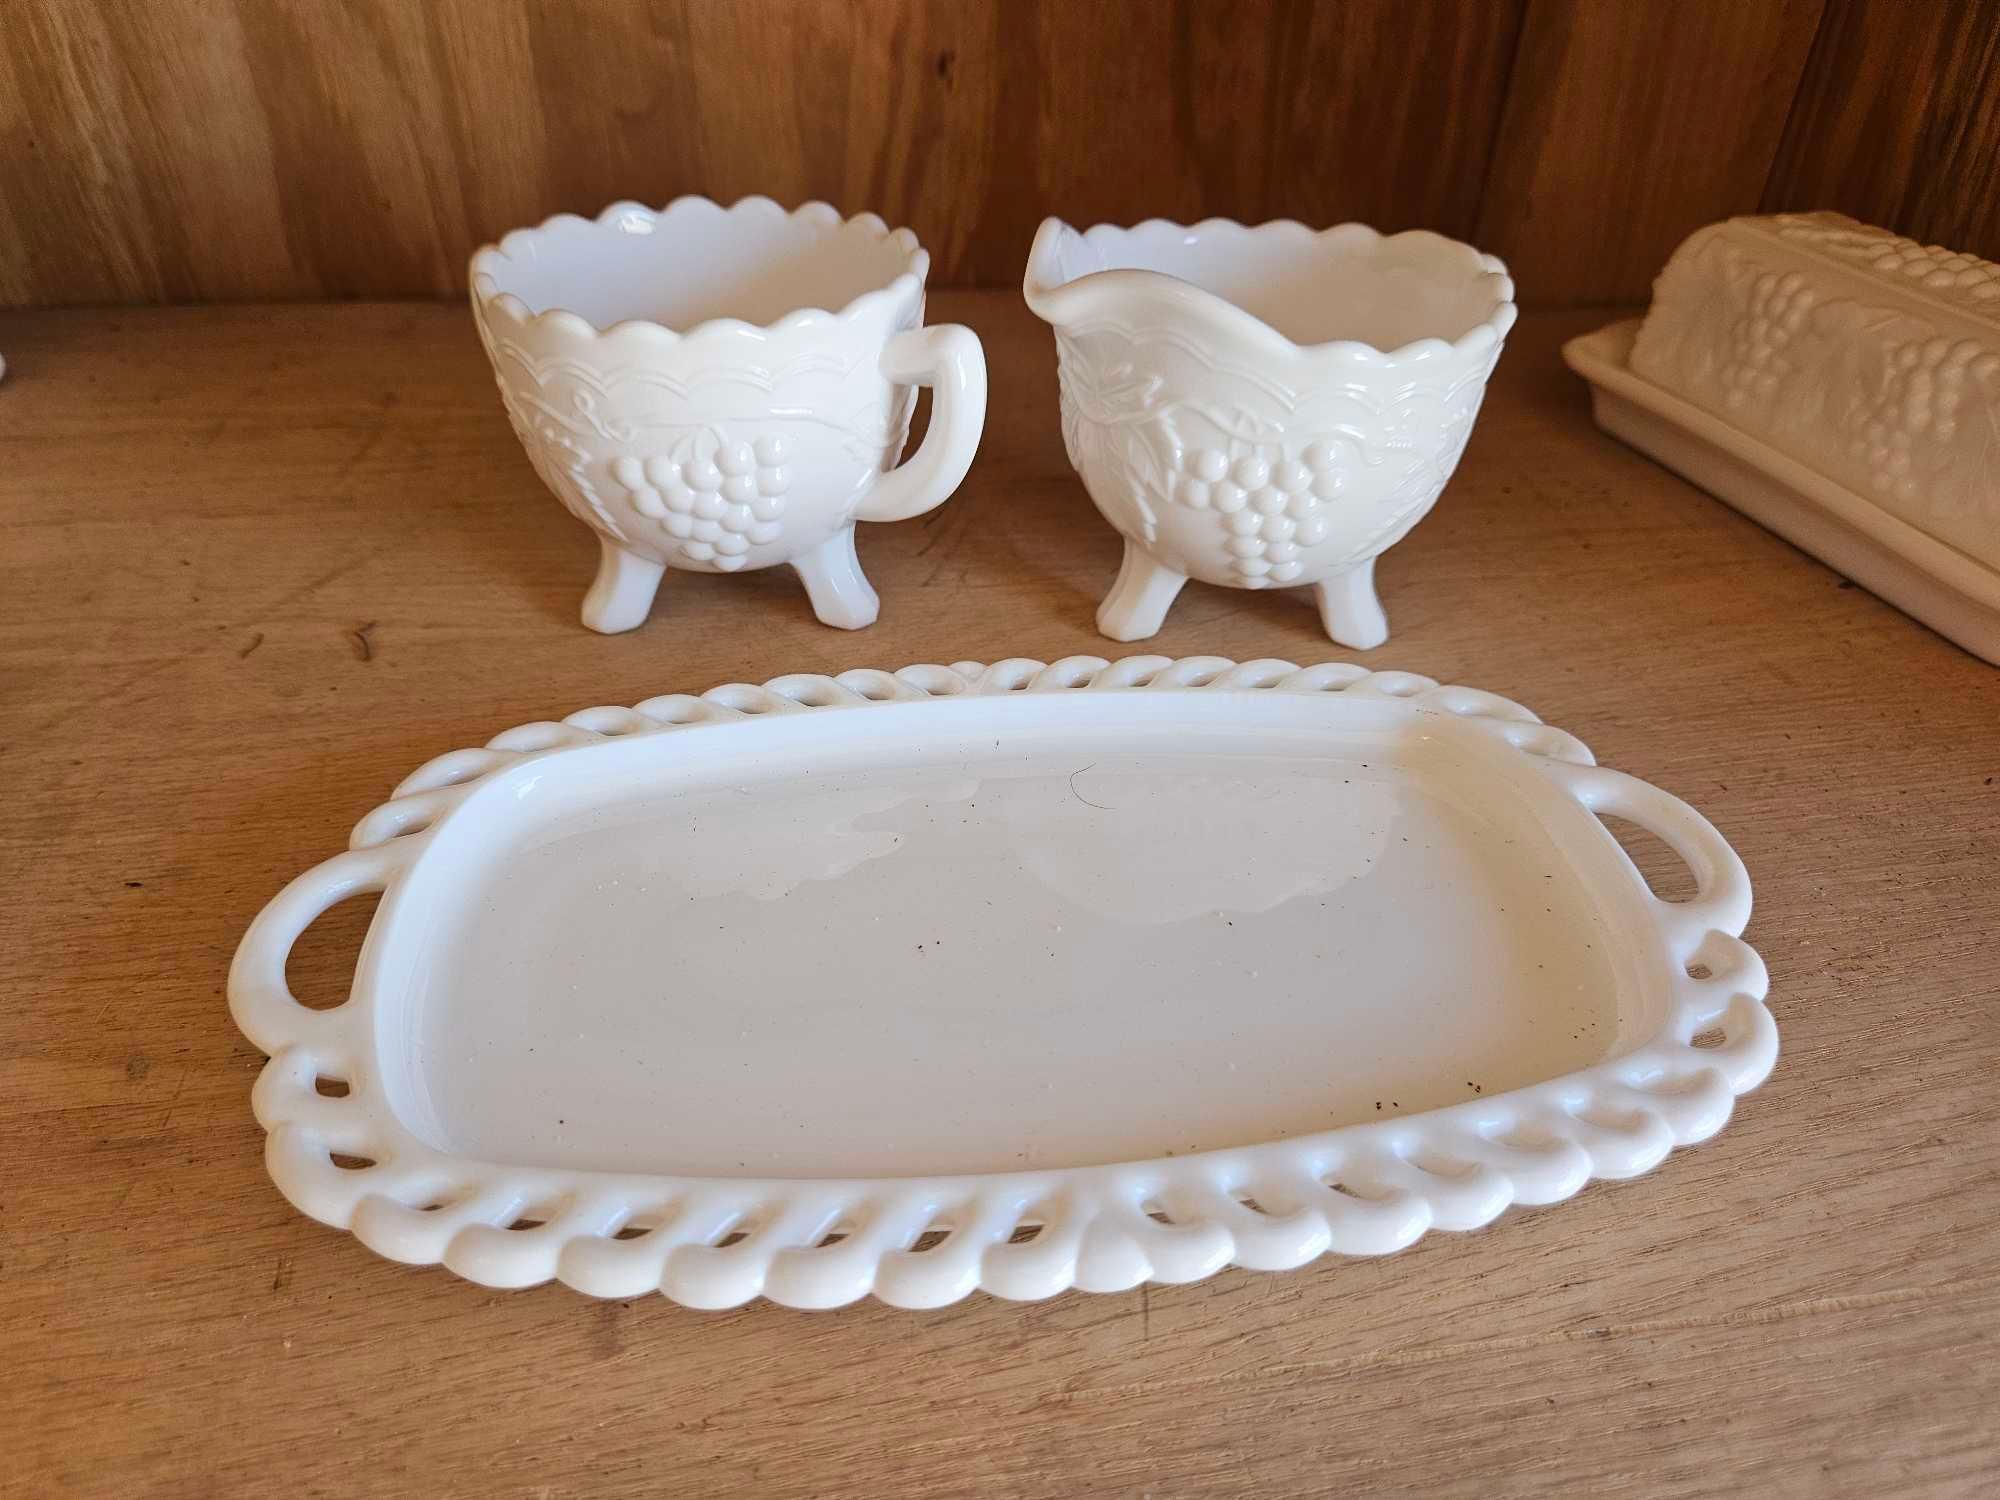 IMPERIAL GLASS CREAMER AND SUGAR, Embossed butter dish, milk glass